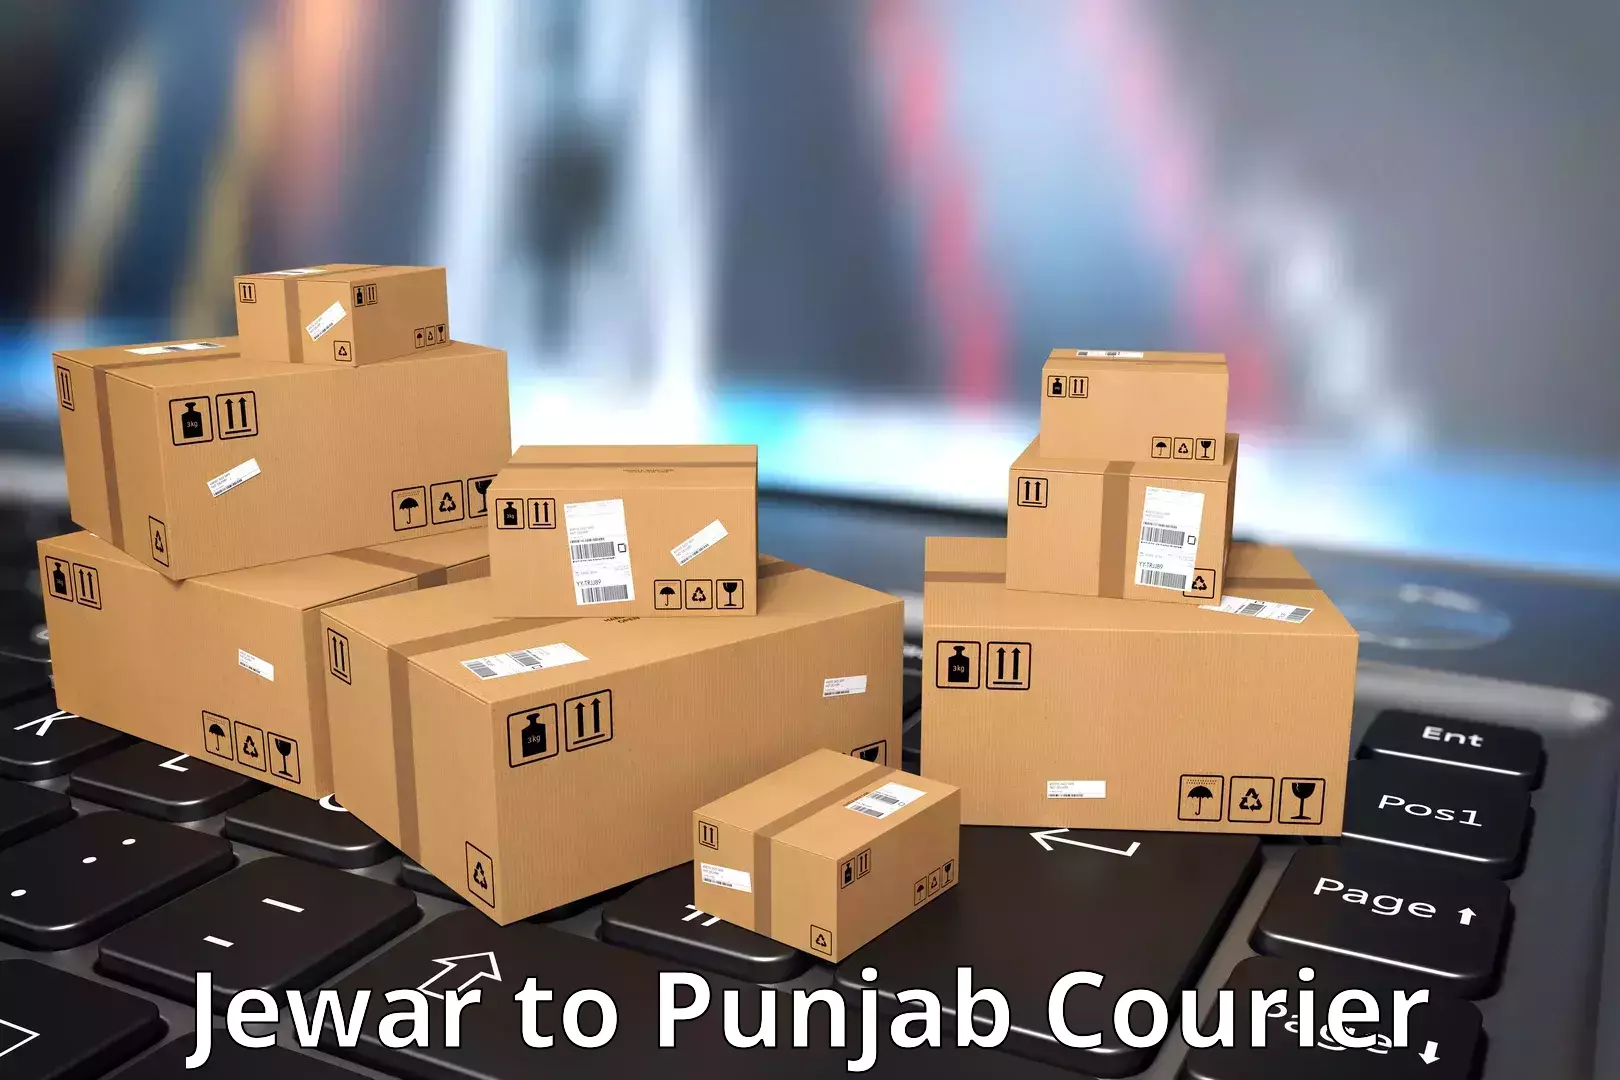 User-friendly delivery service Jewar to Malout